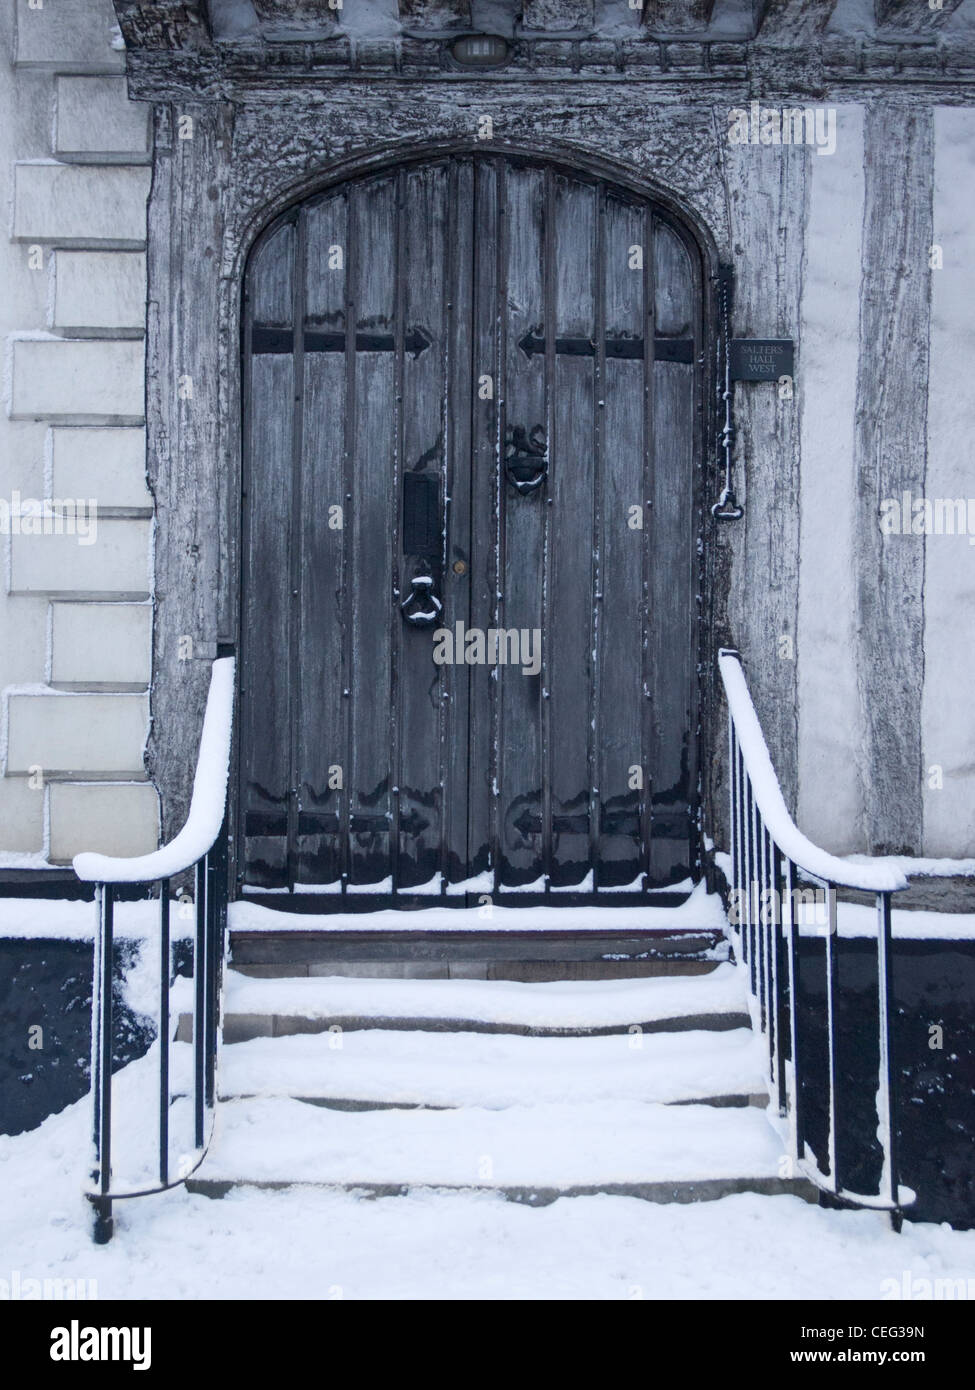 Snow-covered steps leading up to a closed old wooden arched door Stock Photo